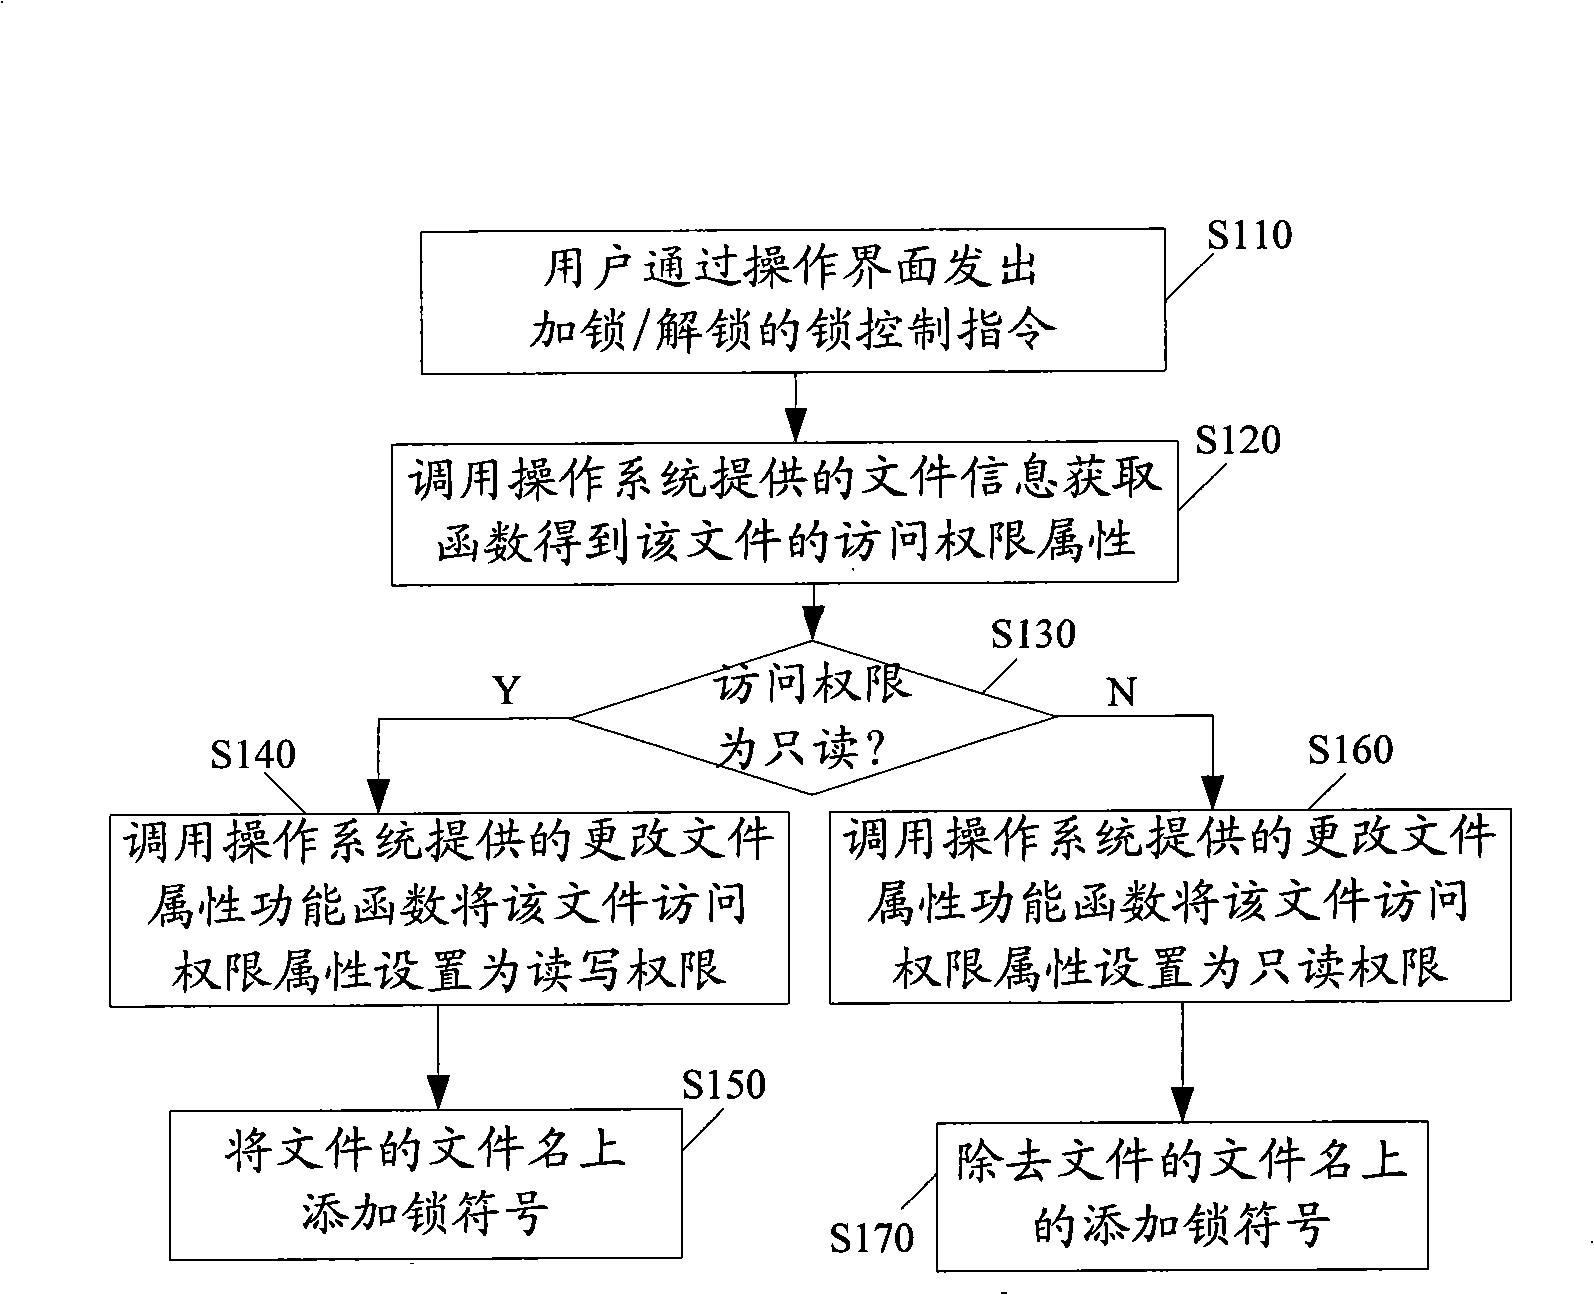 Digital television receiver, method and apparatus for lock control of recording files